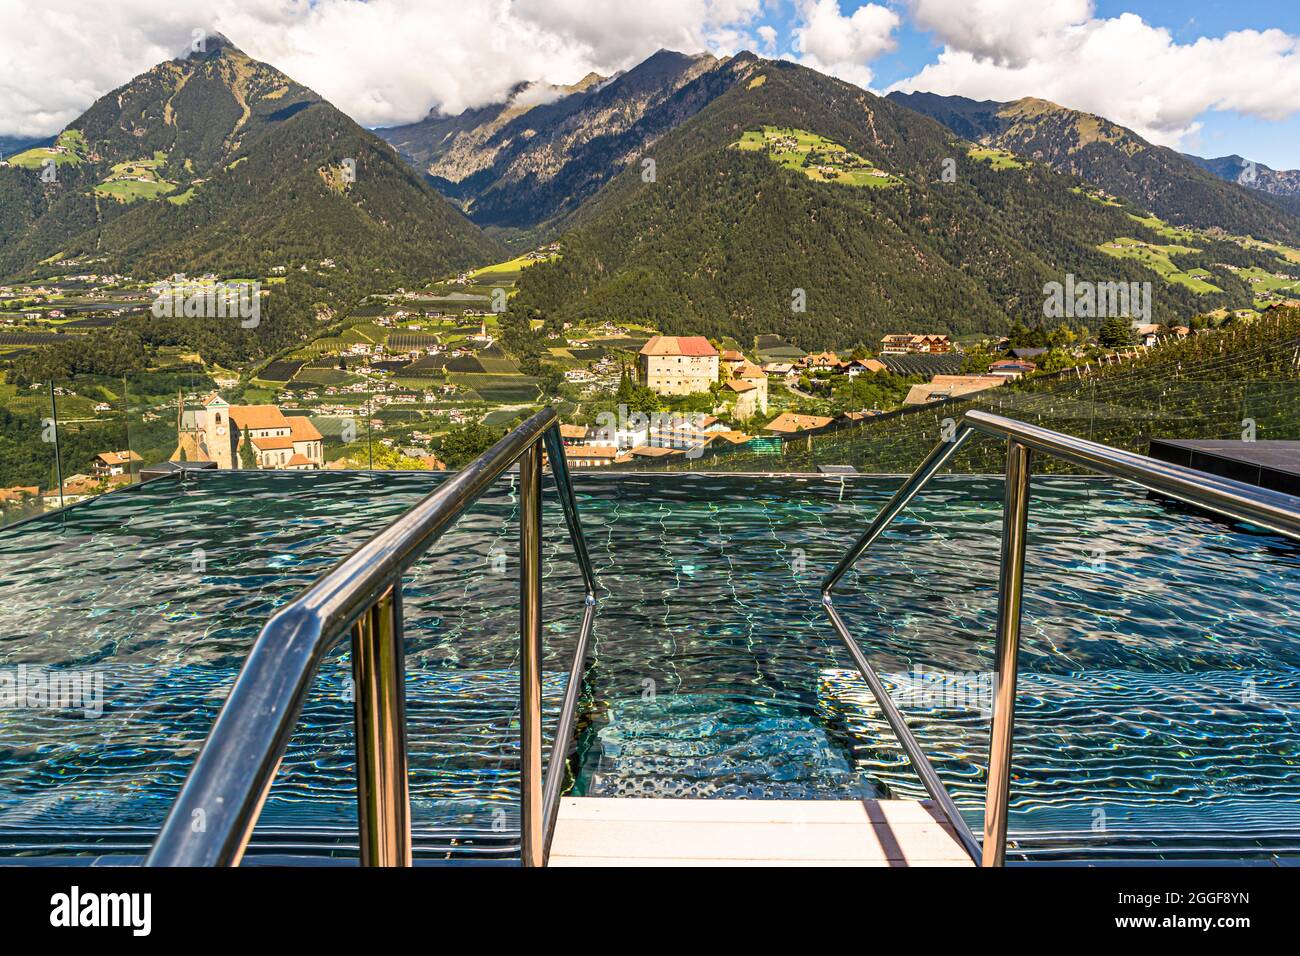 Thermal pool in the wellness area on the roof of the Hotel Hohenwart with a wide view of the landscape around Schenna in South Tyrol, Italy Stock Photo